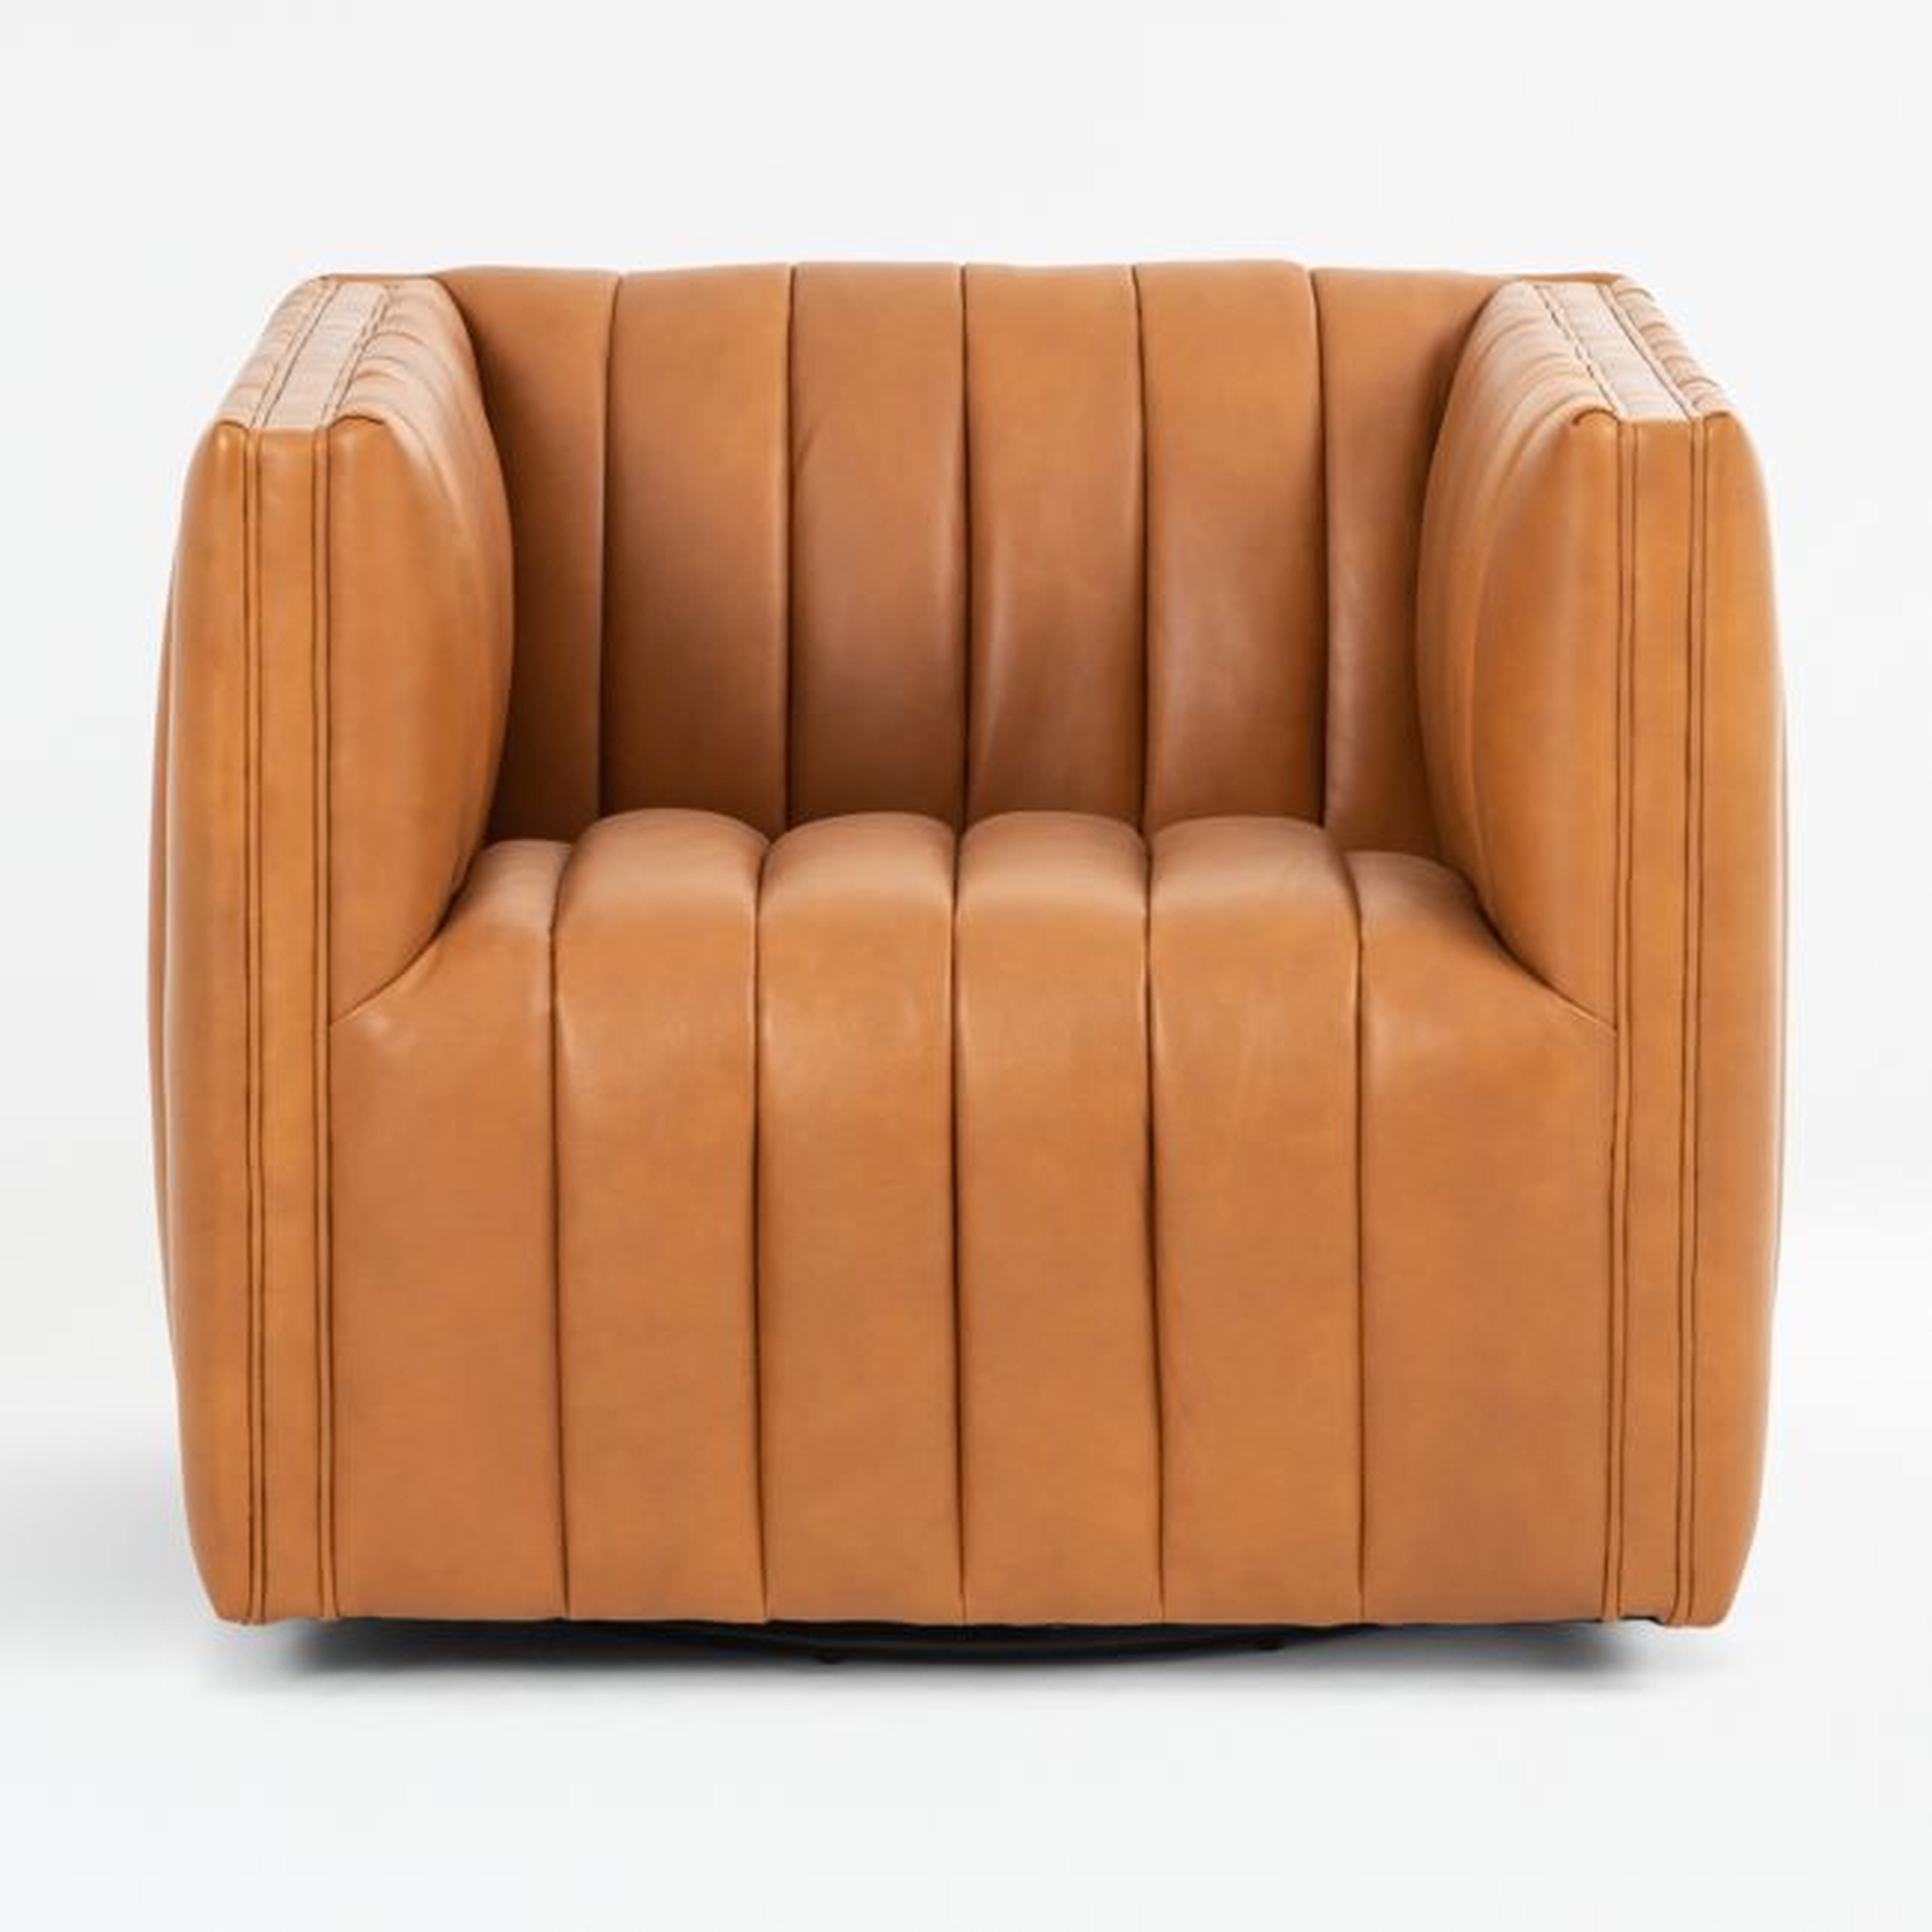 Cosima Leather Swivel Chair - Crate and Barrel